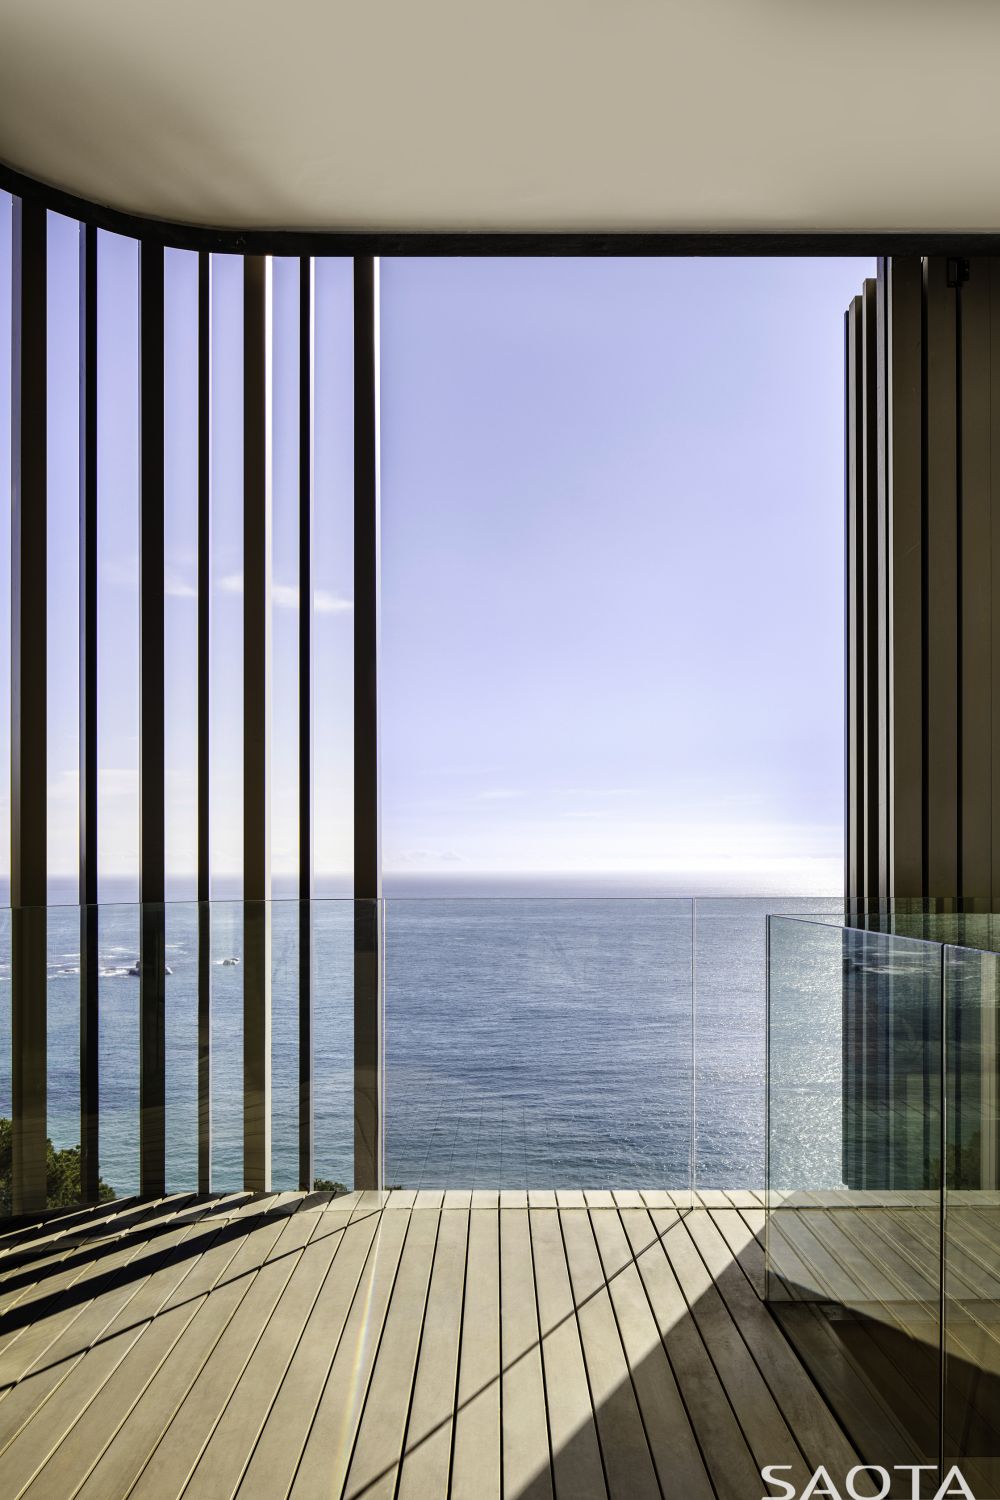 All sections of the house enjoy panoramic views of their surroundings, including views towards the ocean